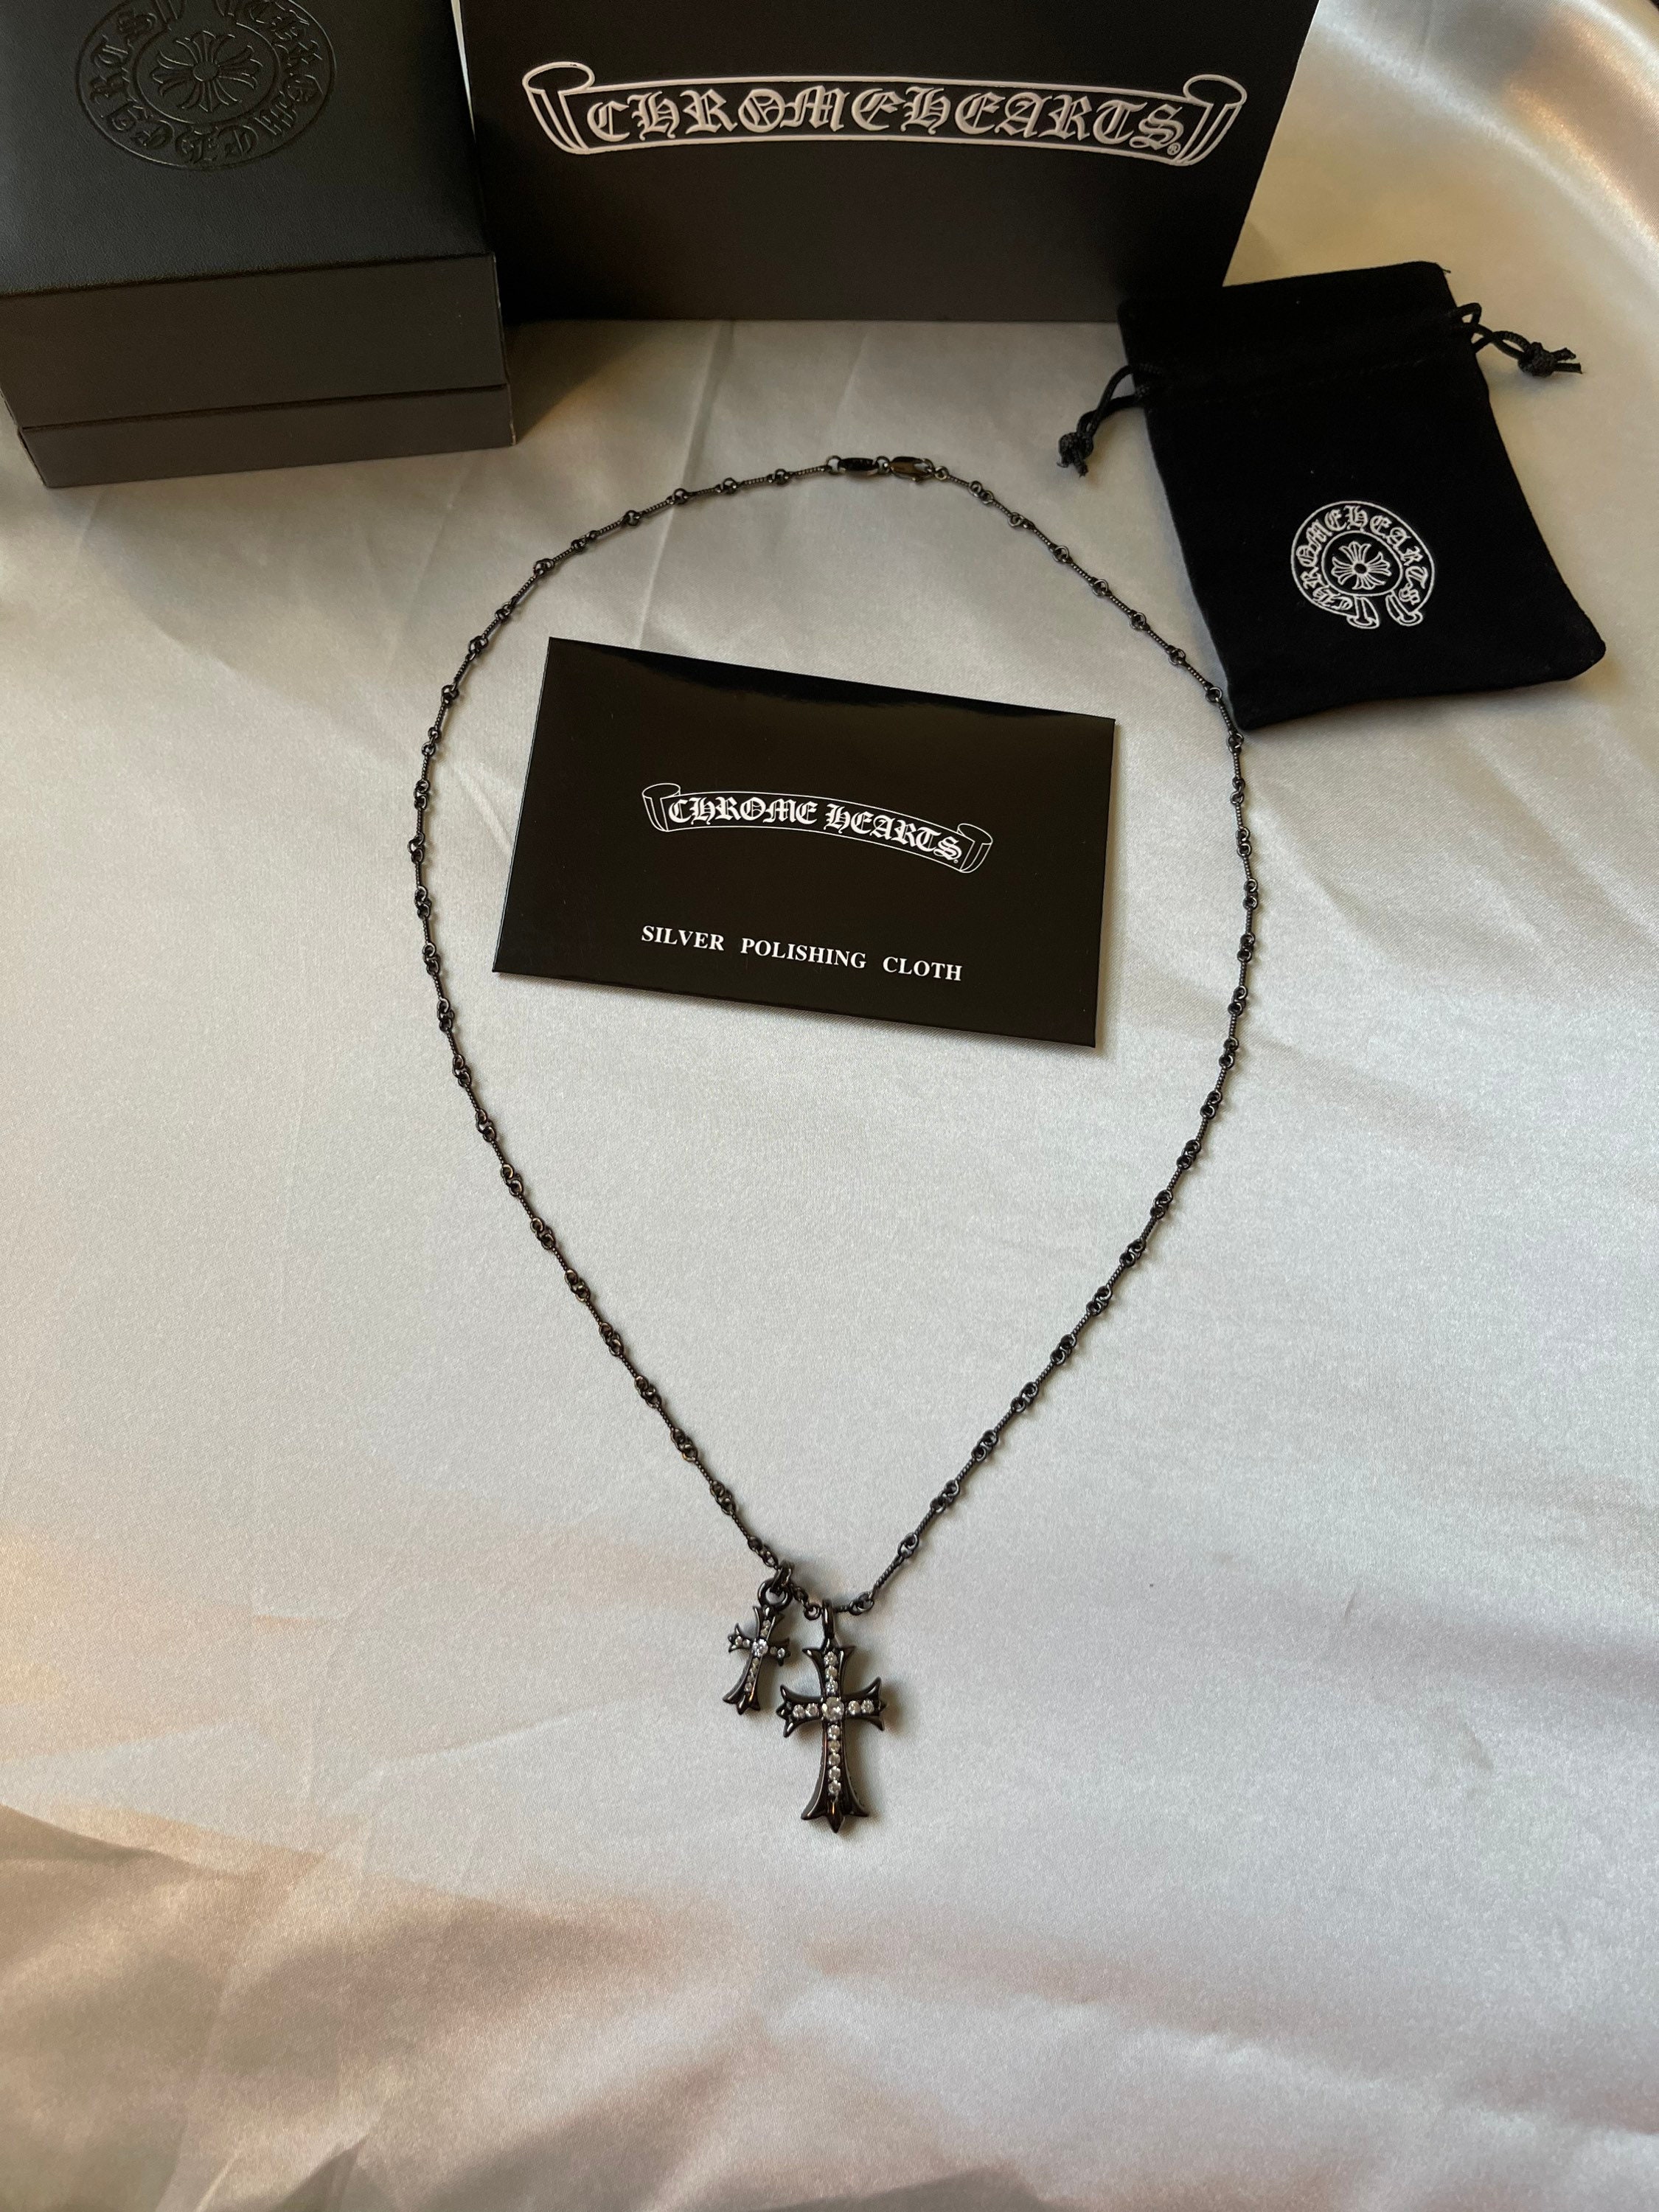 CHROME HEARTS CH CROSS CHROME HEARTS Necklaces & Chokers